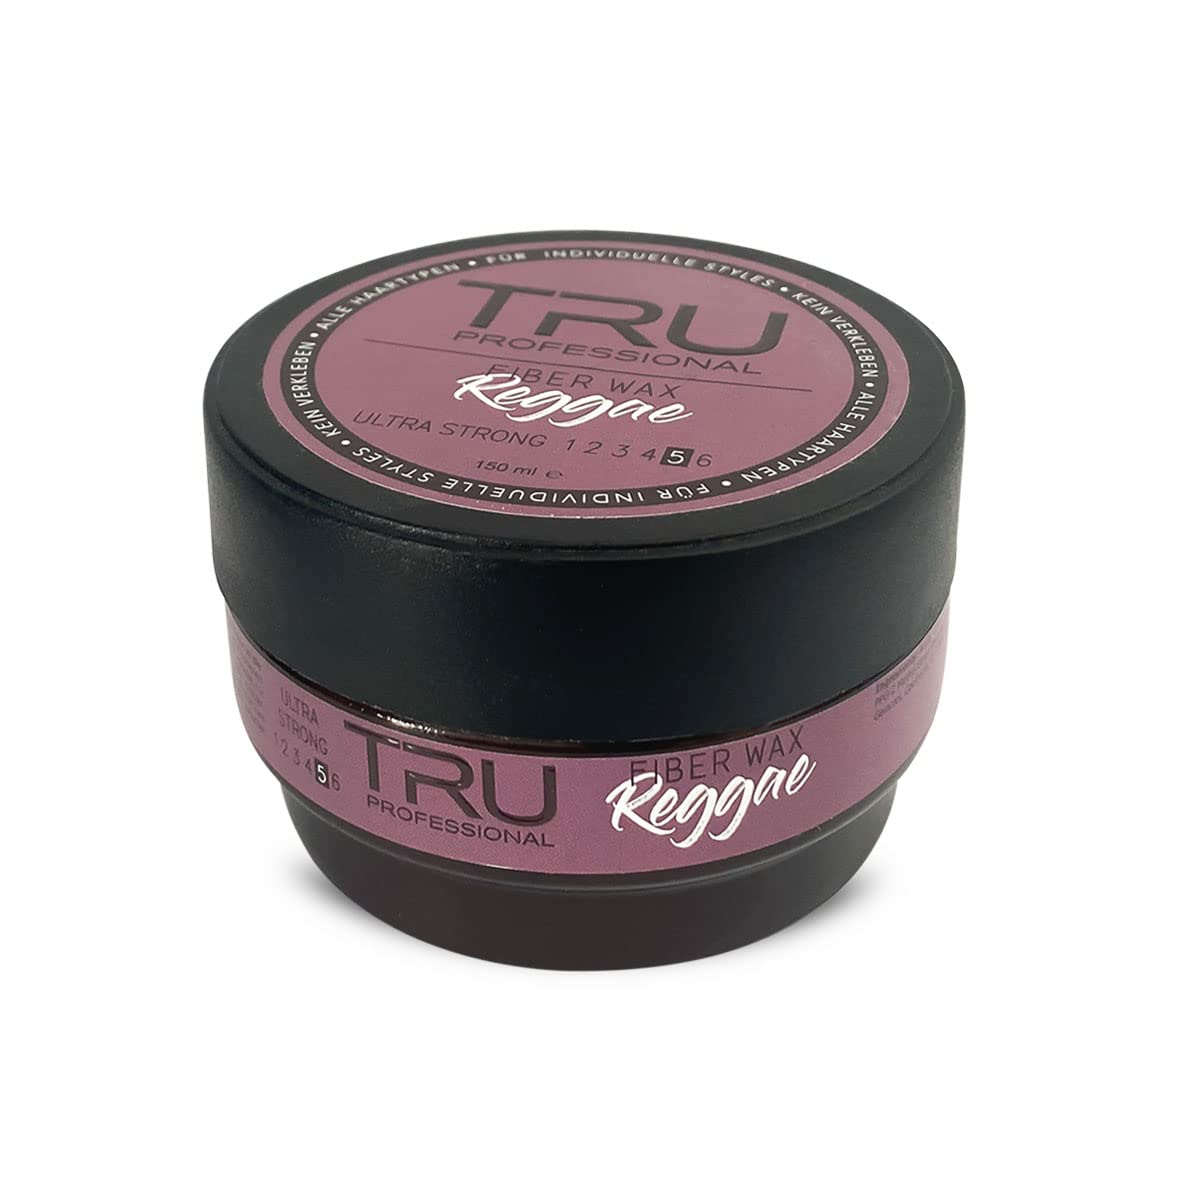 TRU Hair wax for men, flexible hair styling with strong hold for daily use, 150 ml (fibre wax reggae)